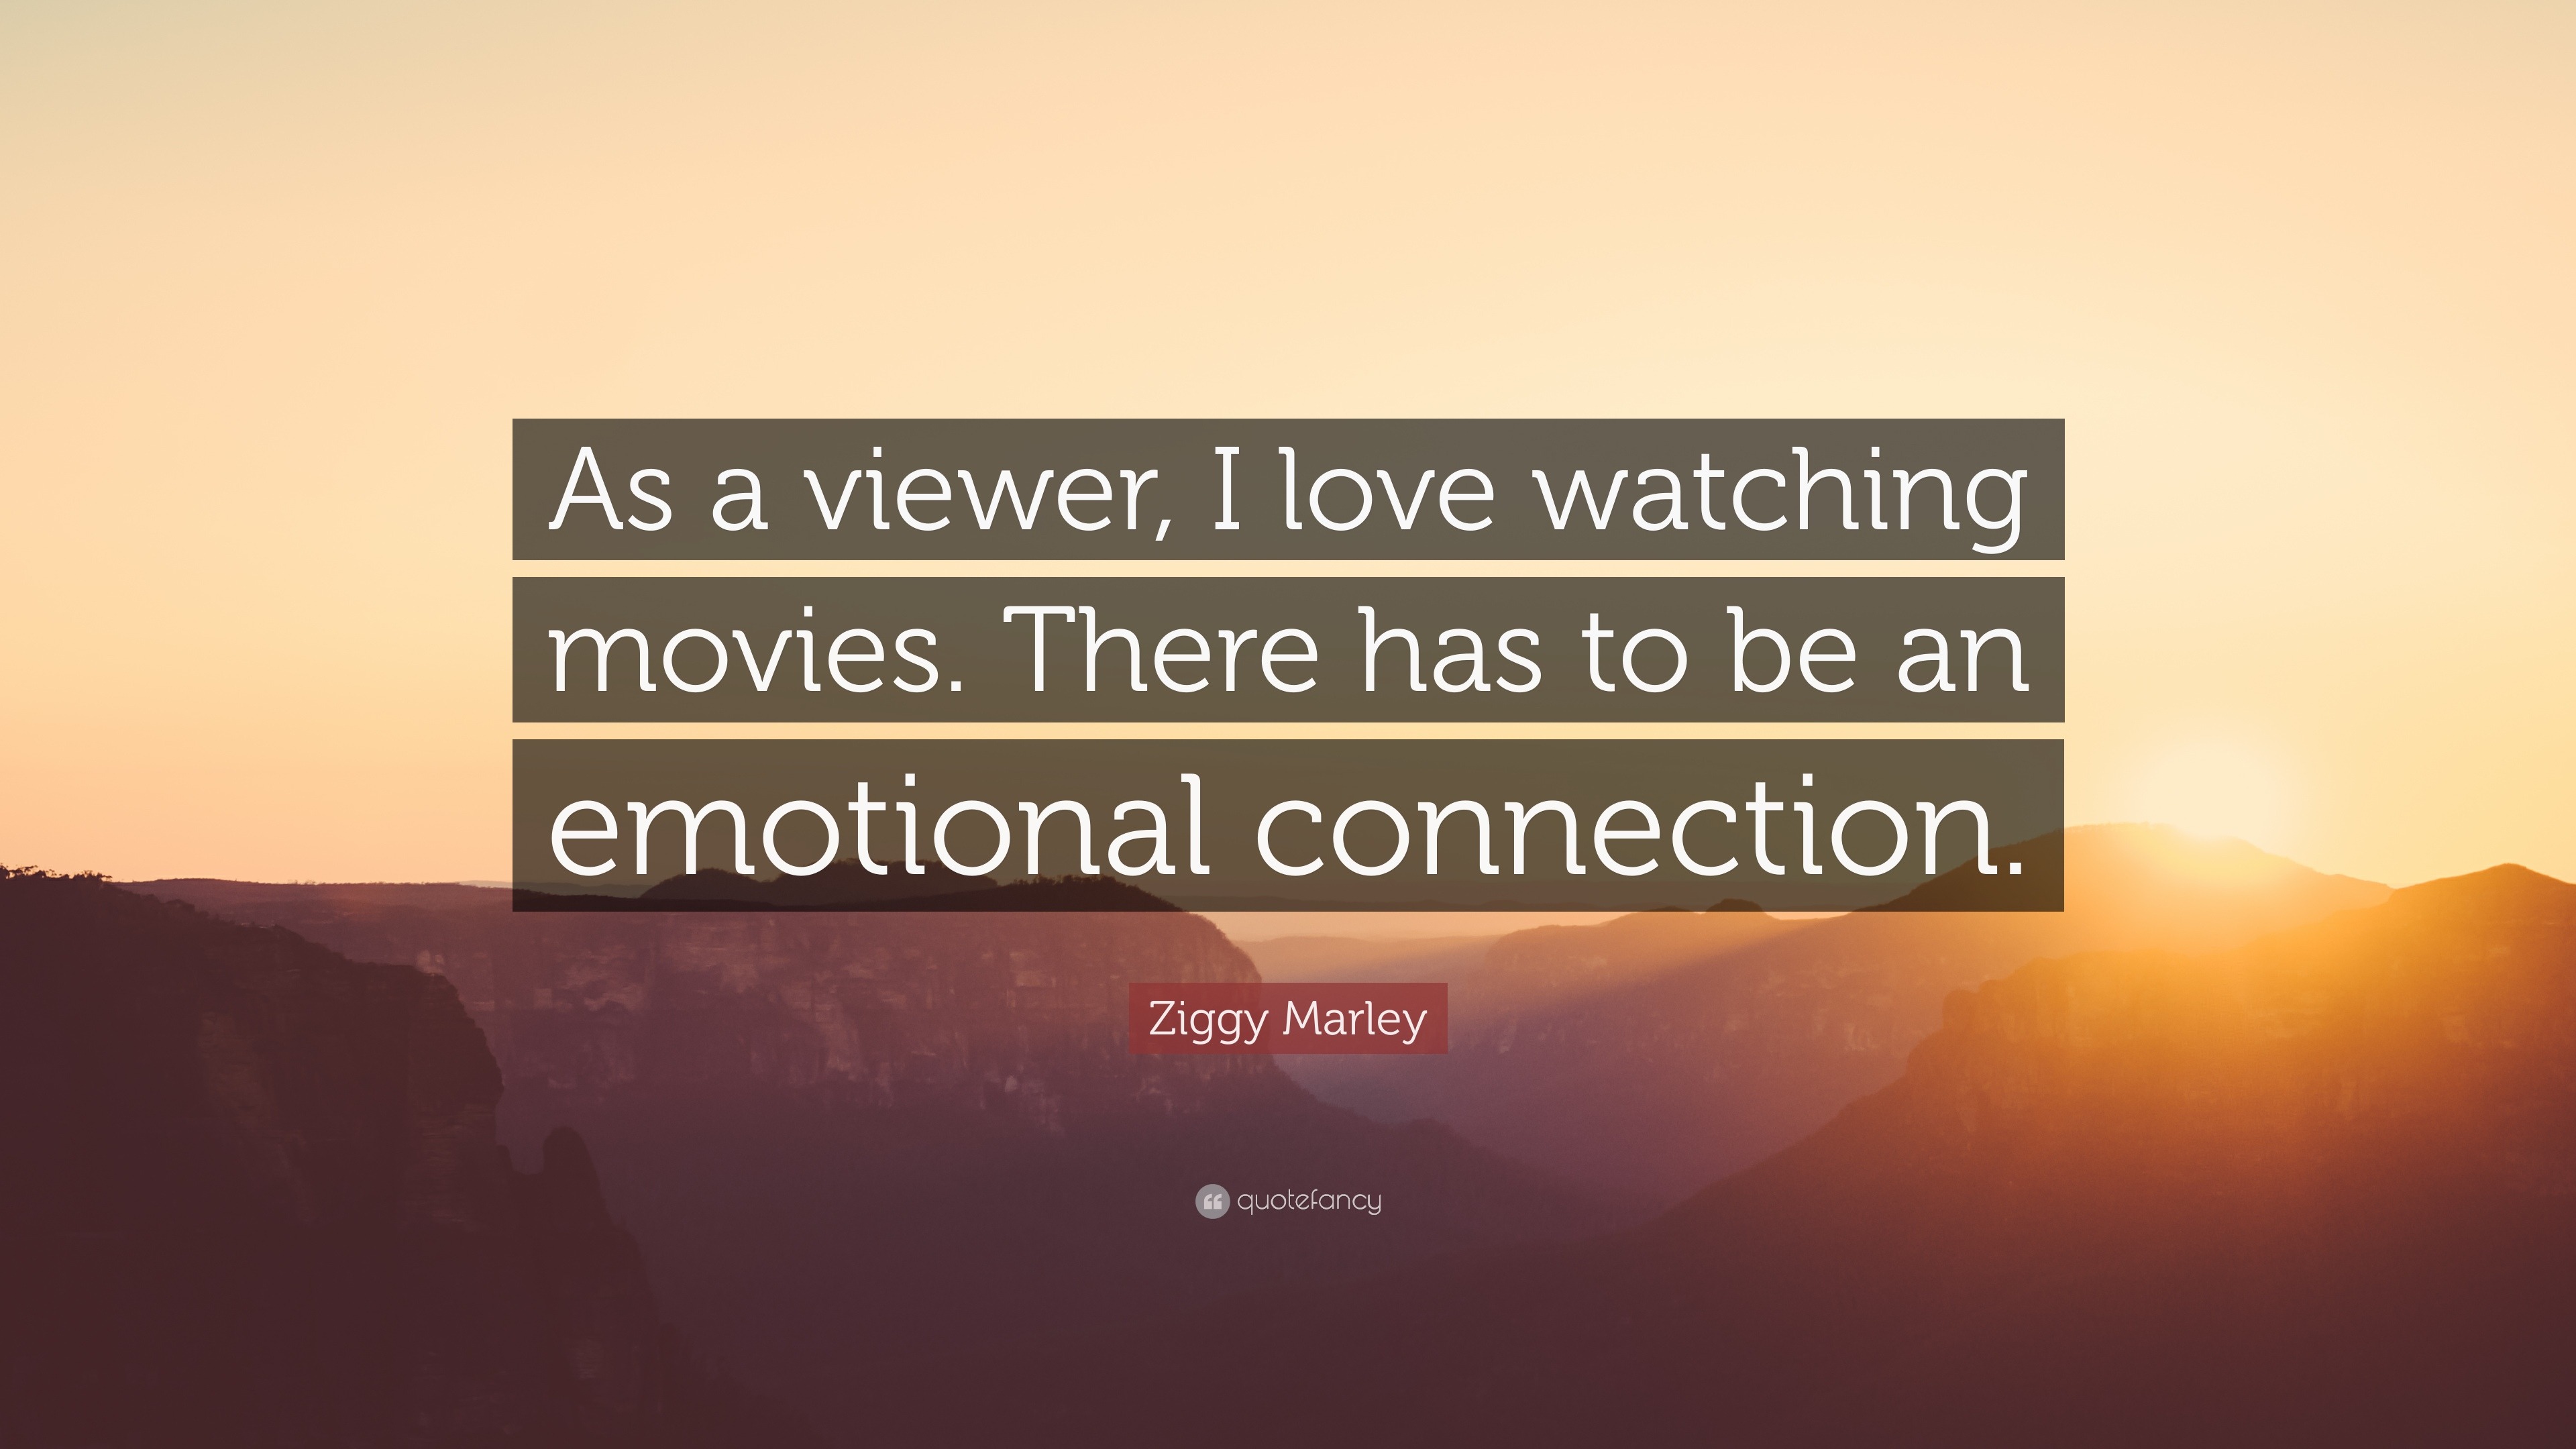 Ziggy Marley Quote “As a viewer I love watching movies There has